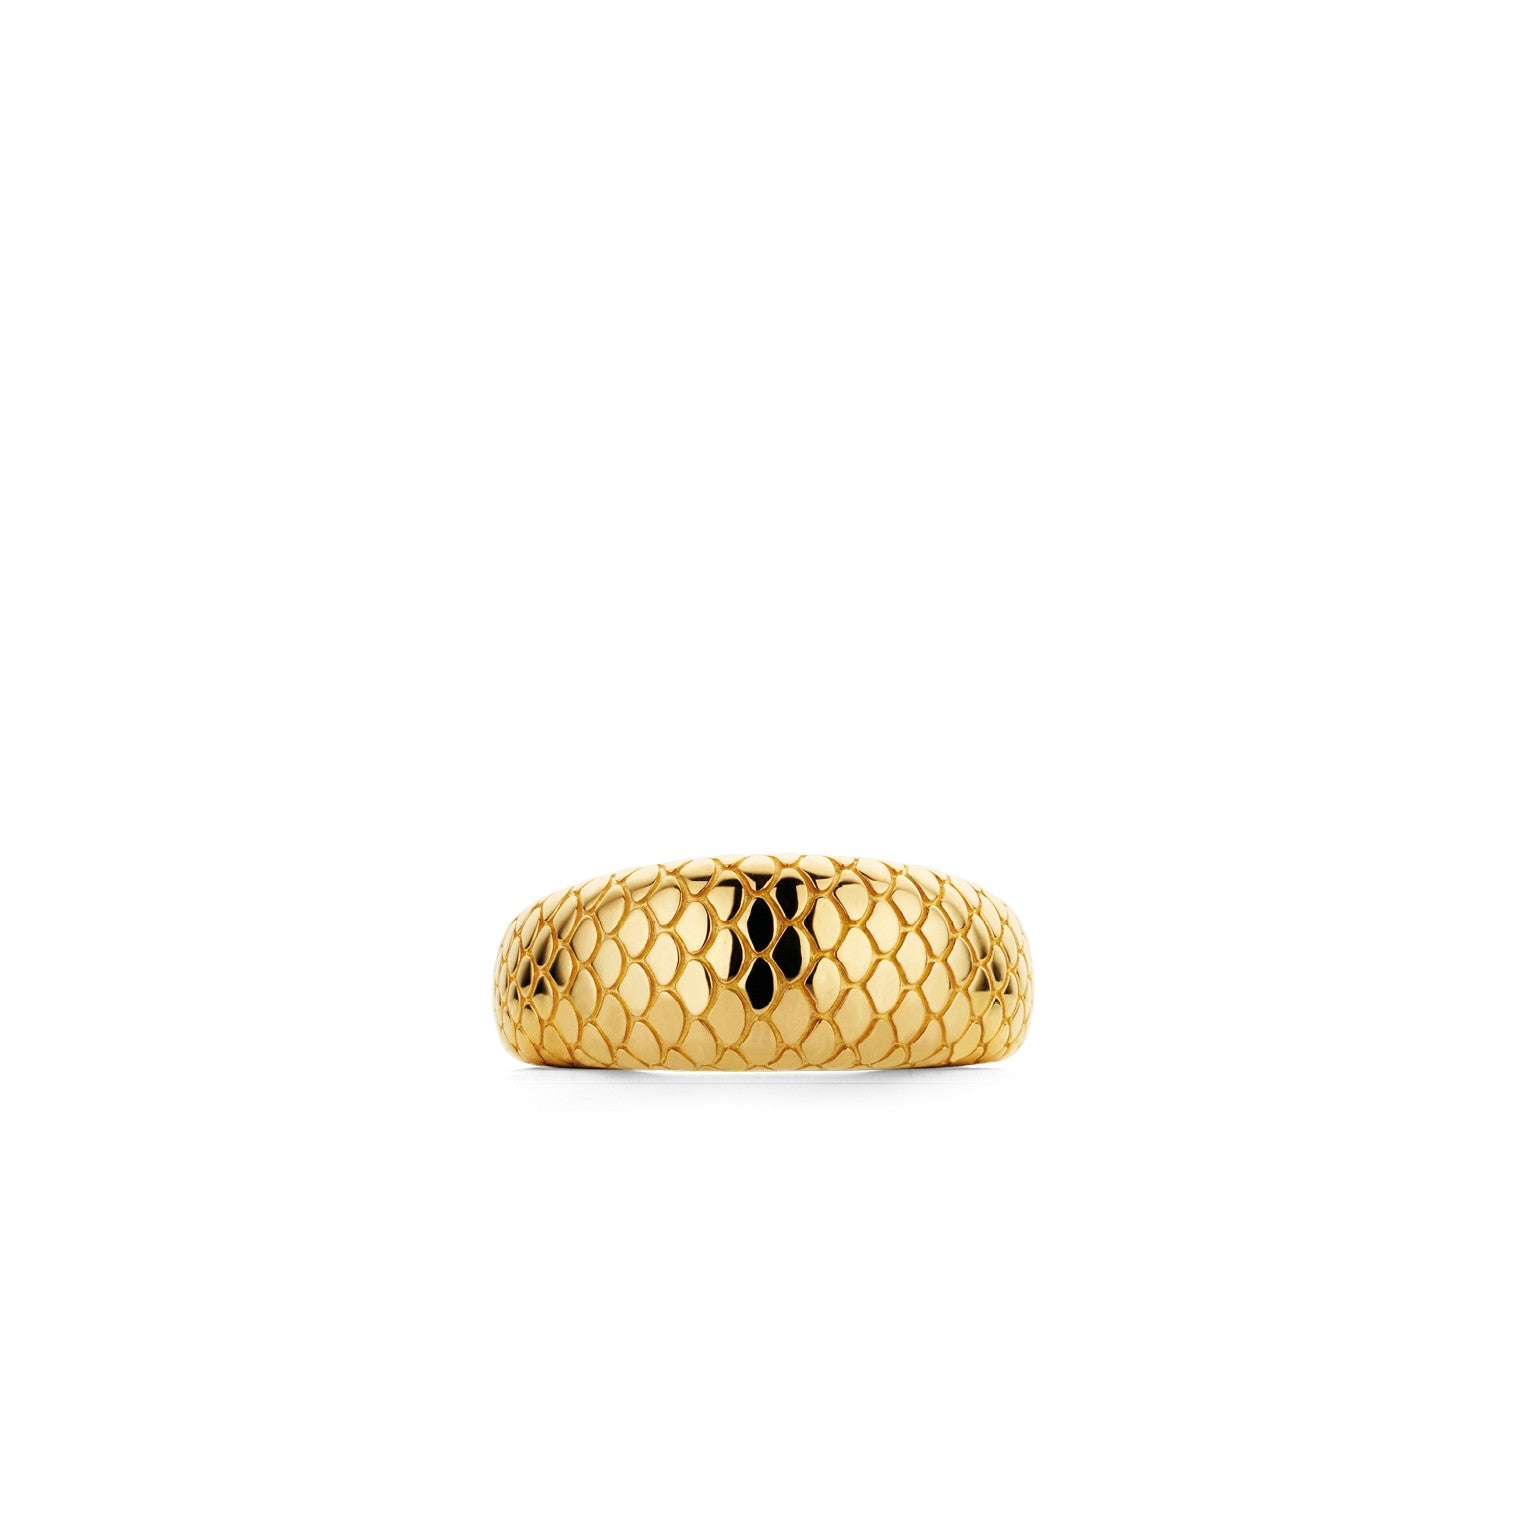 TI SENTO Sterling Silver Gold Tone Tapered Snake Print Ring 